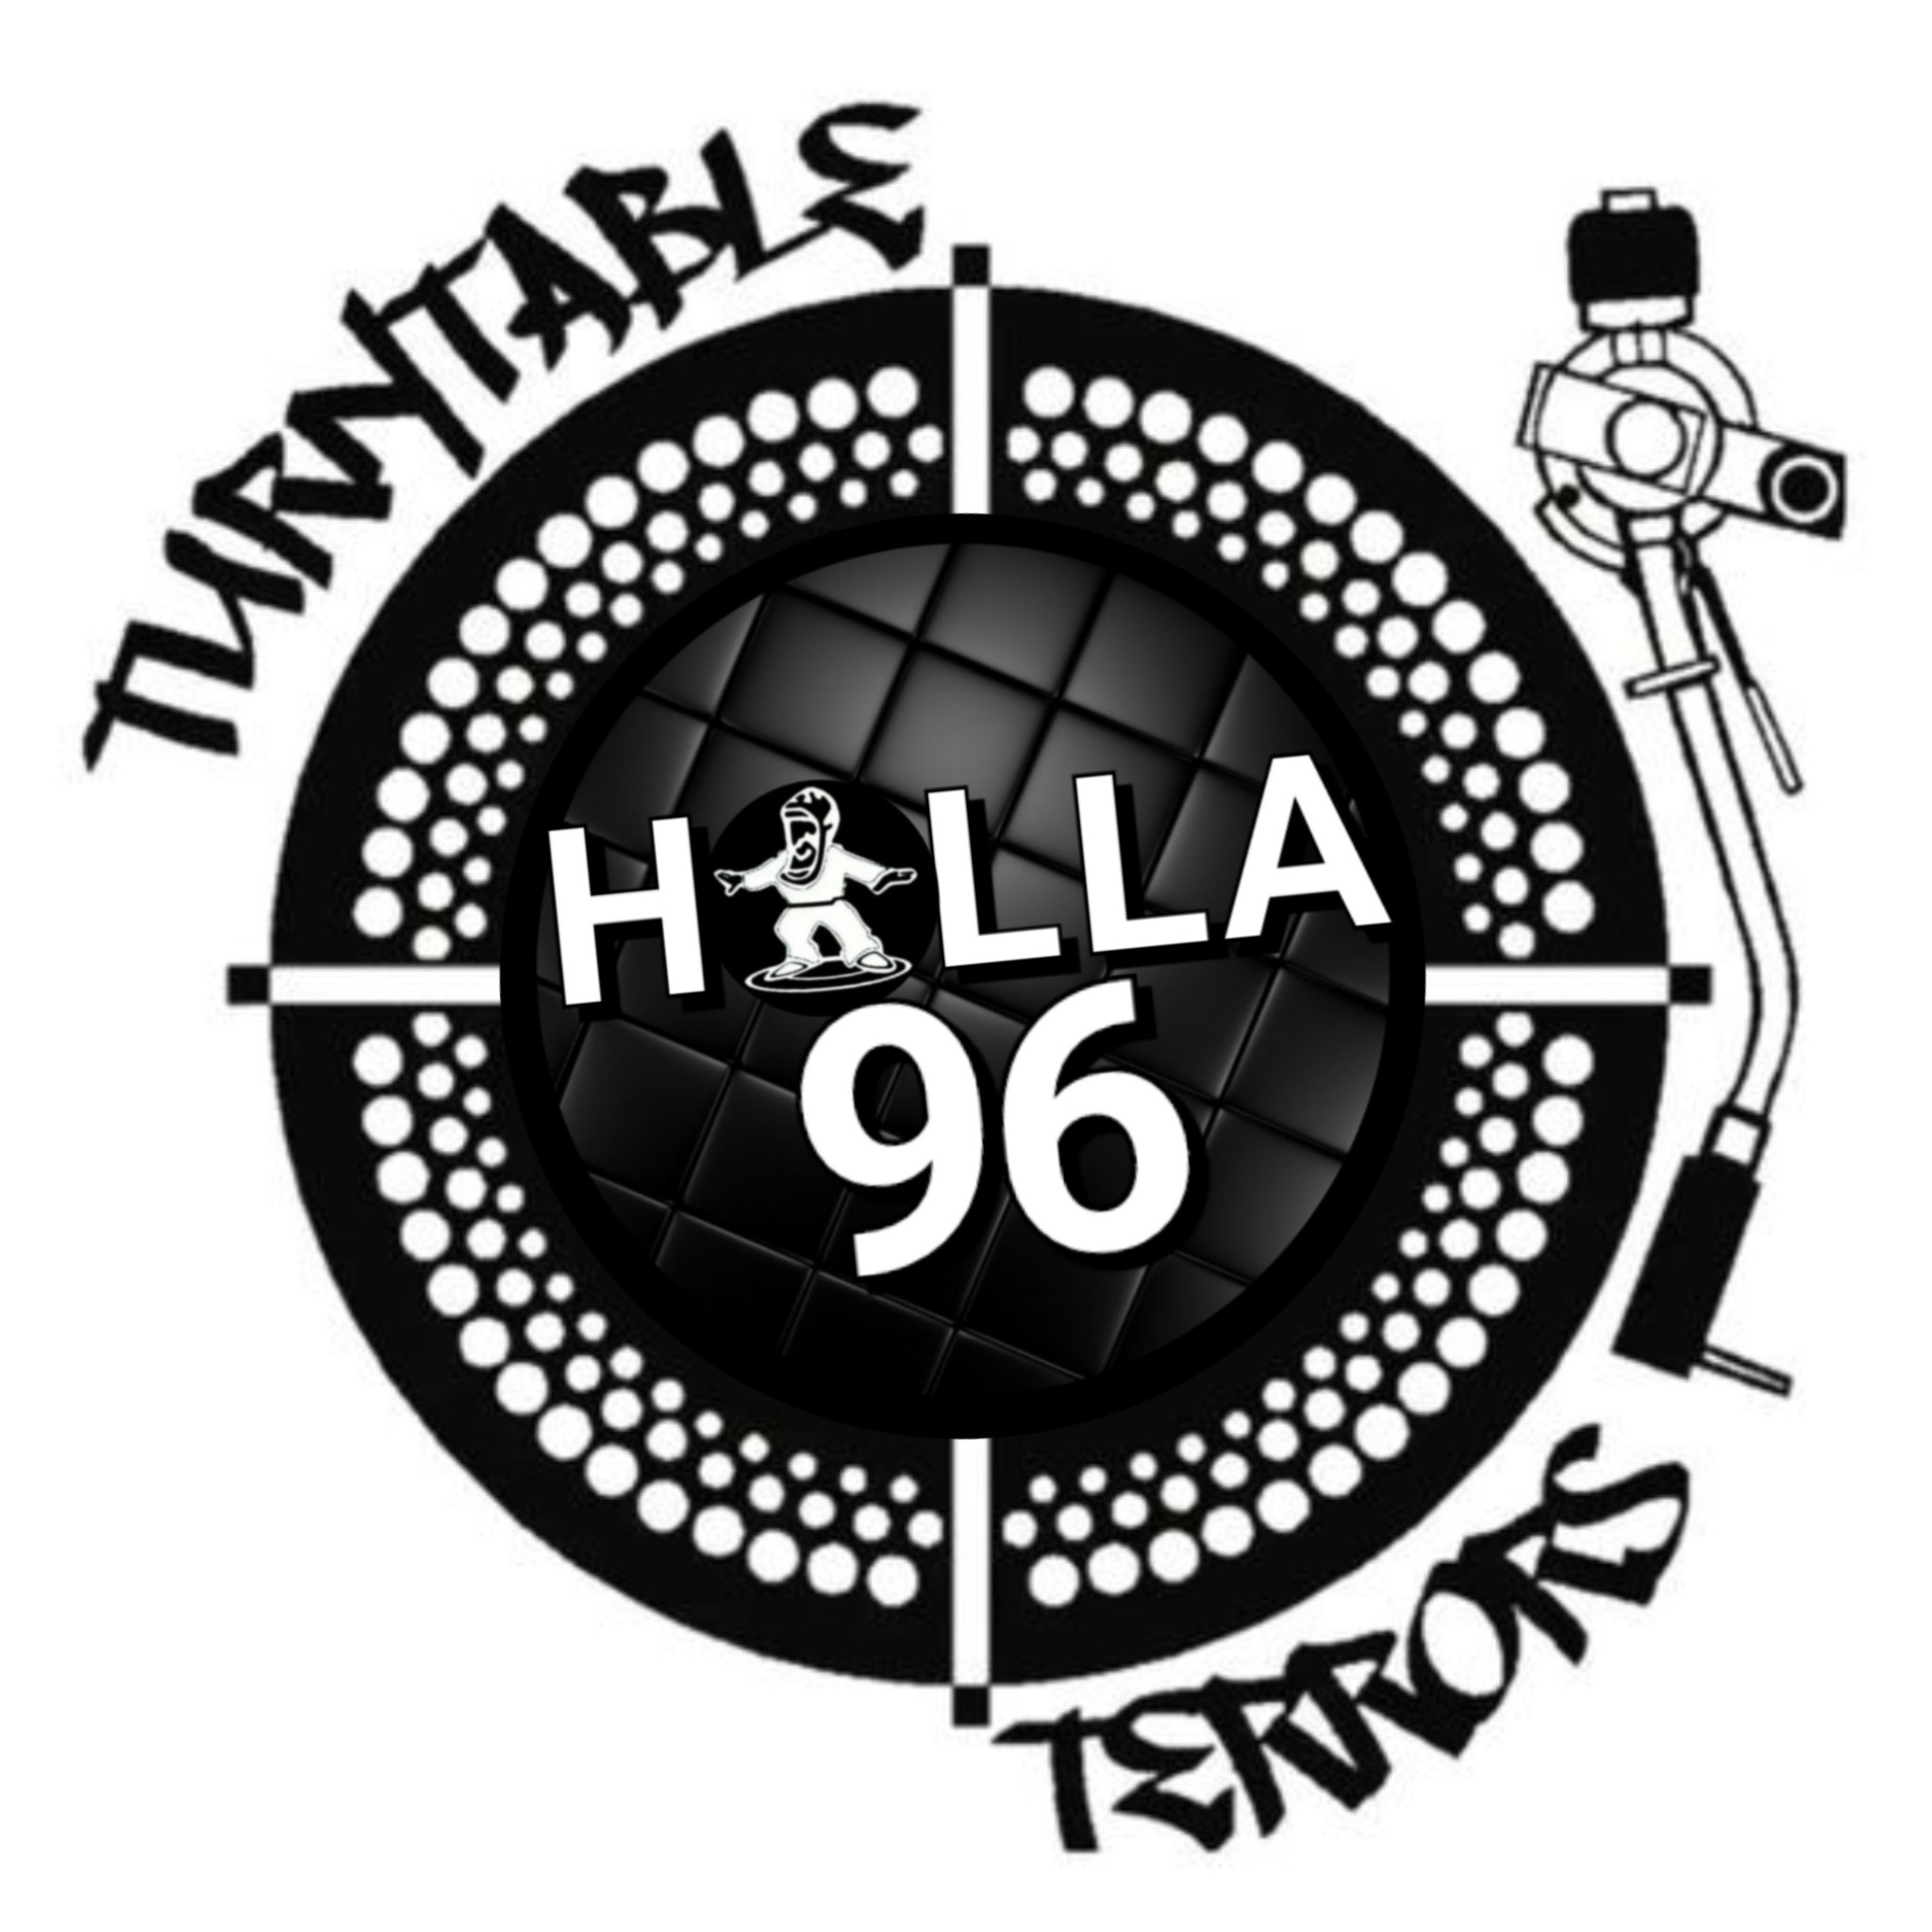 Art for HOLLA 96.1 by Holla 96